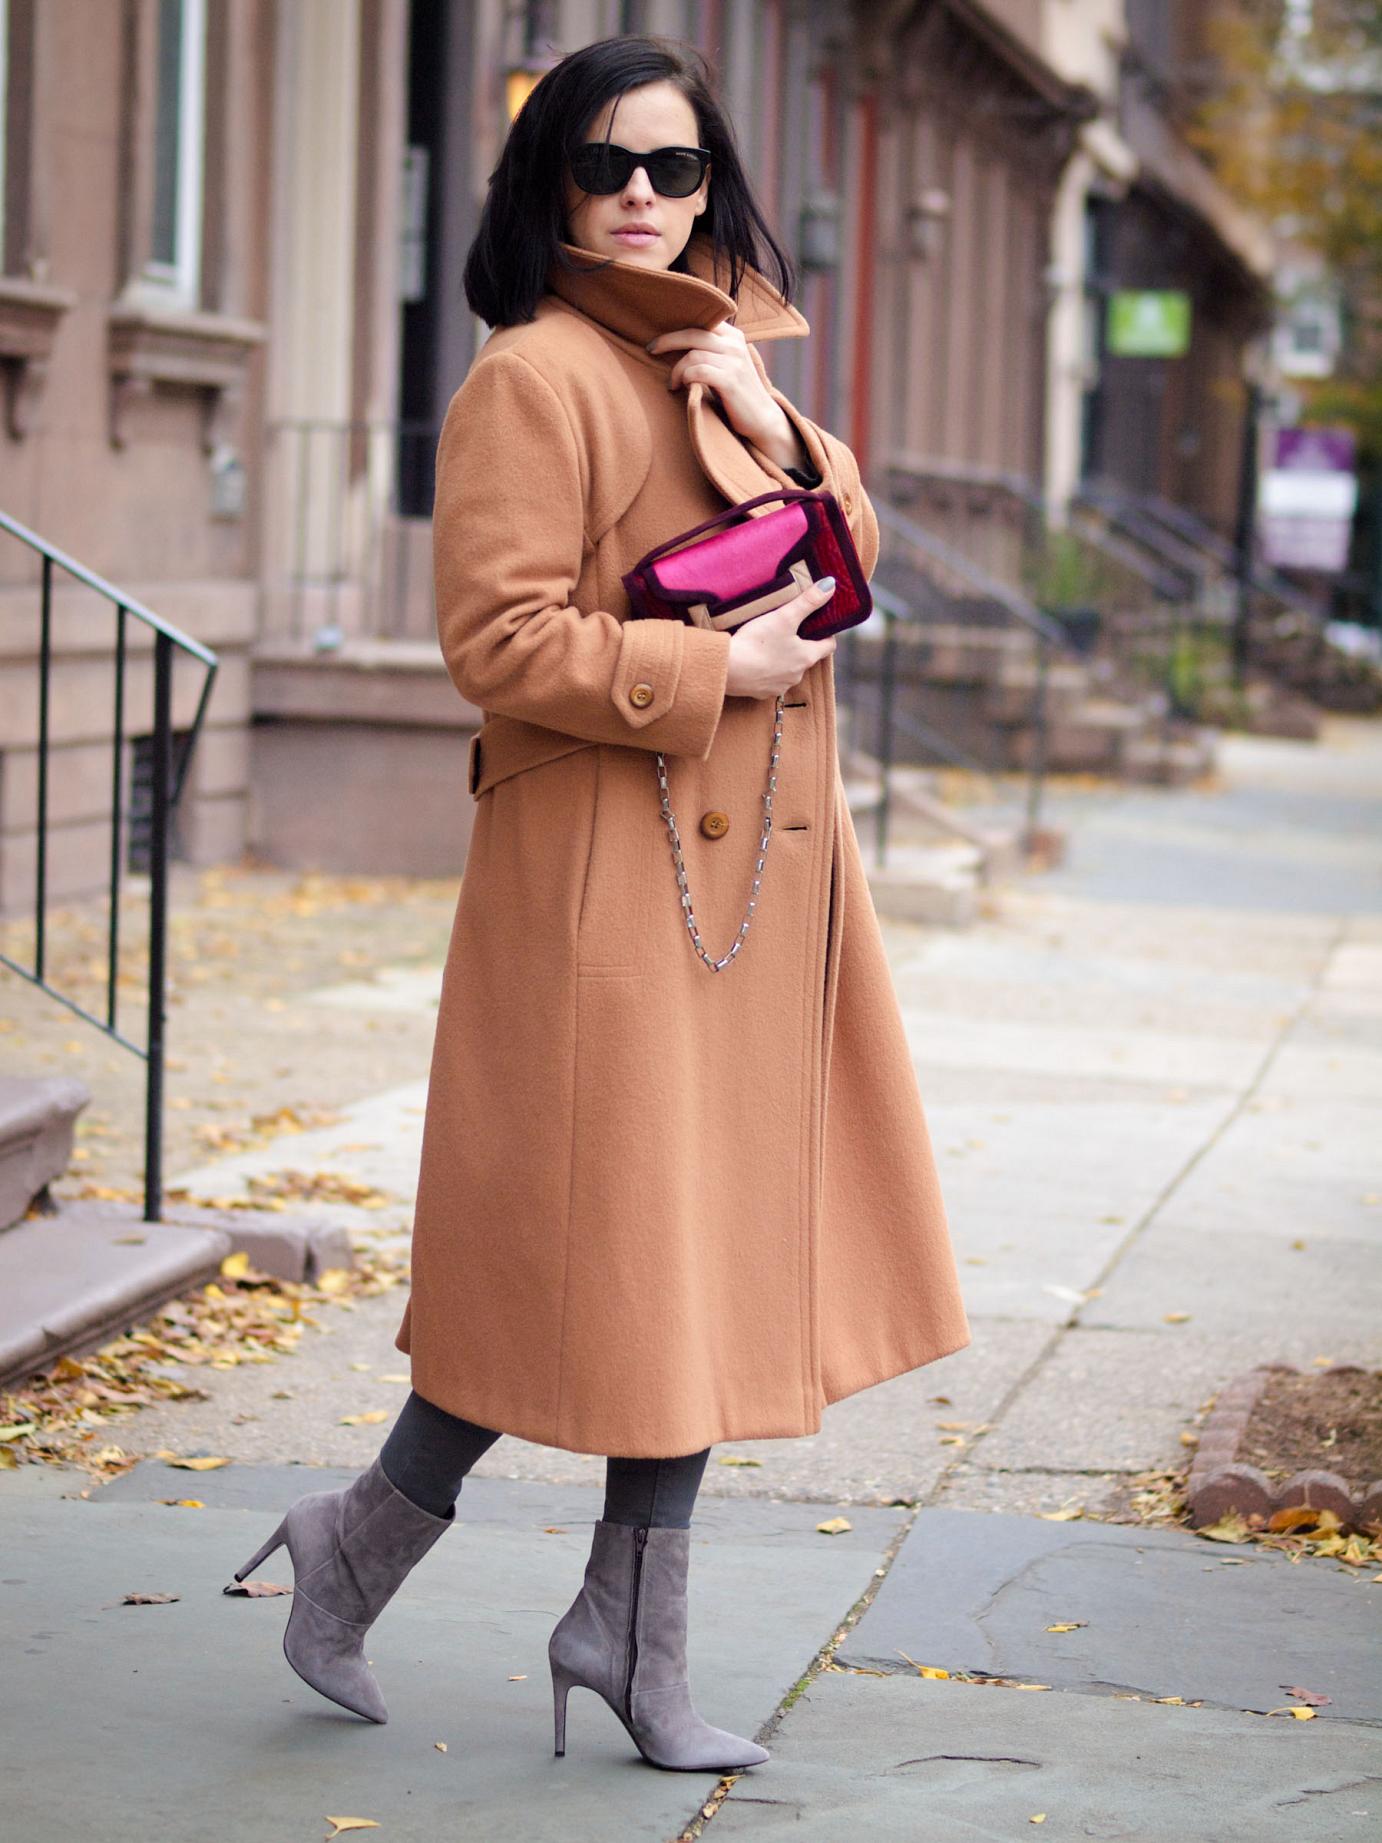 bittersweet colours, street style, fall coats, camel coat, camel and grey mix, pierre hardy bag, levis jeans, brandy pham jewelry, maternity style, baby bump, 25 weeks, sweater weather,